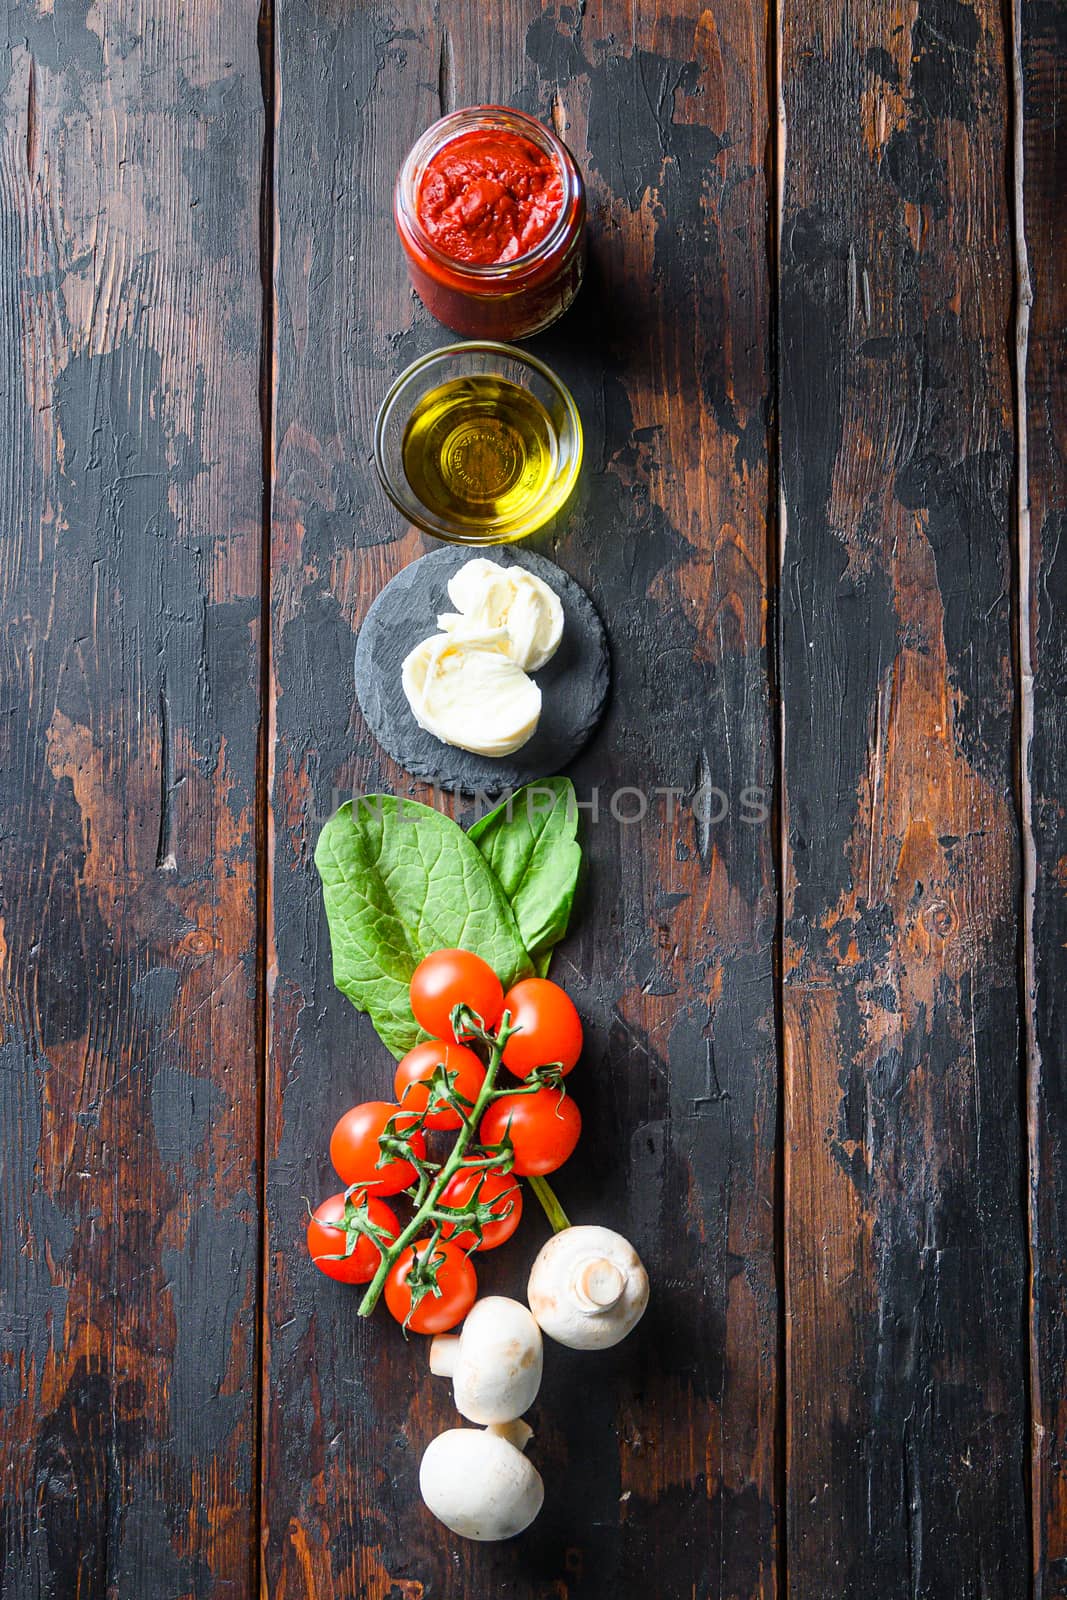 Raw pizza ingredients for cooking, tomatoes, oil, garlic, basil, sauce, mushroom on wood background by Ilianesolenyi